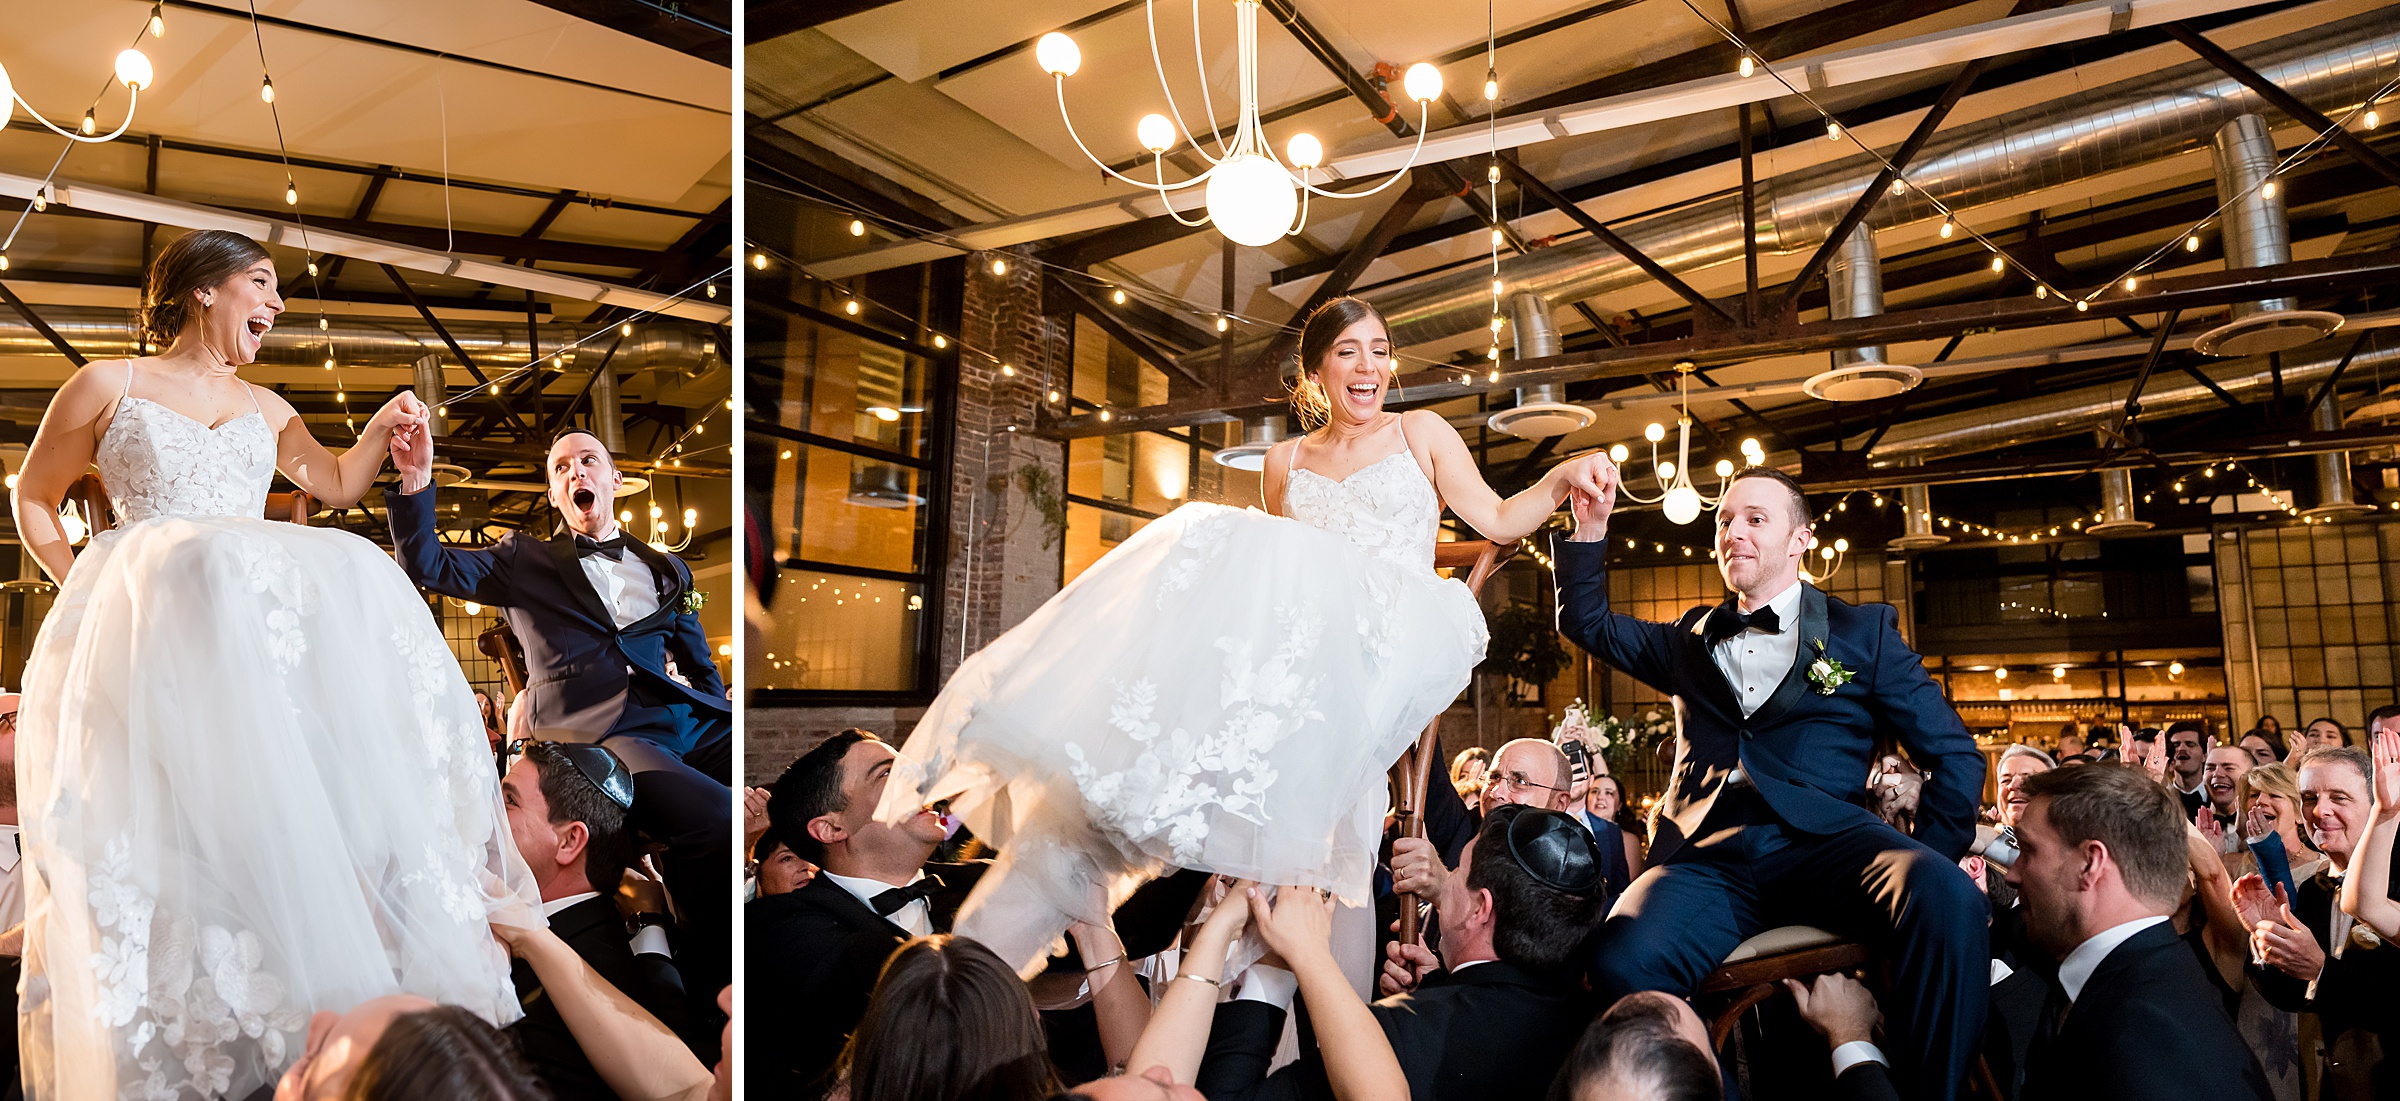 At a Lilah Events wedding, the newlyweds are joyfully tossed into the air by guests at the reception.